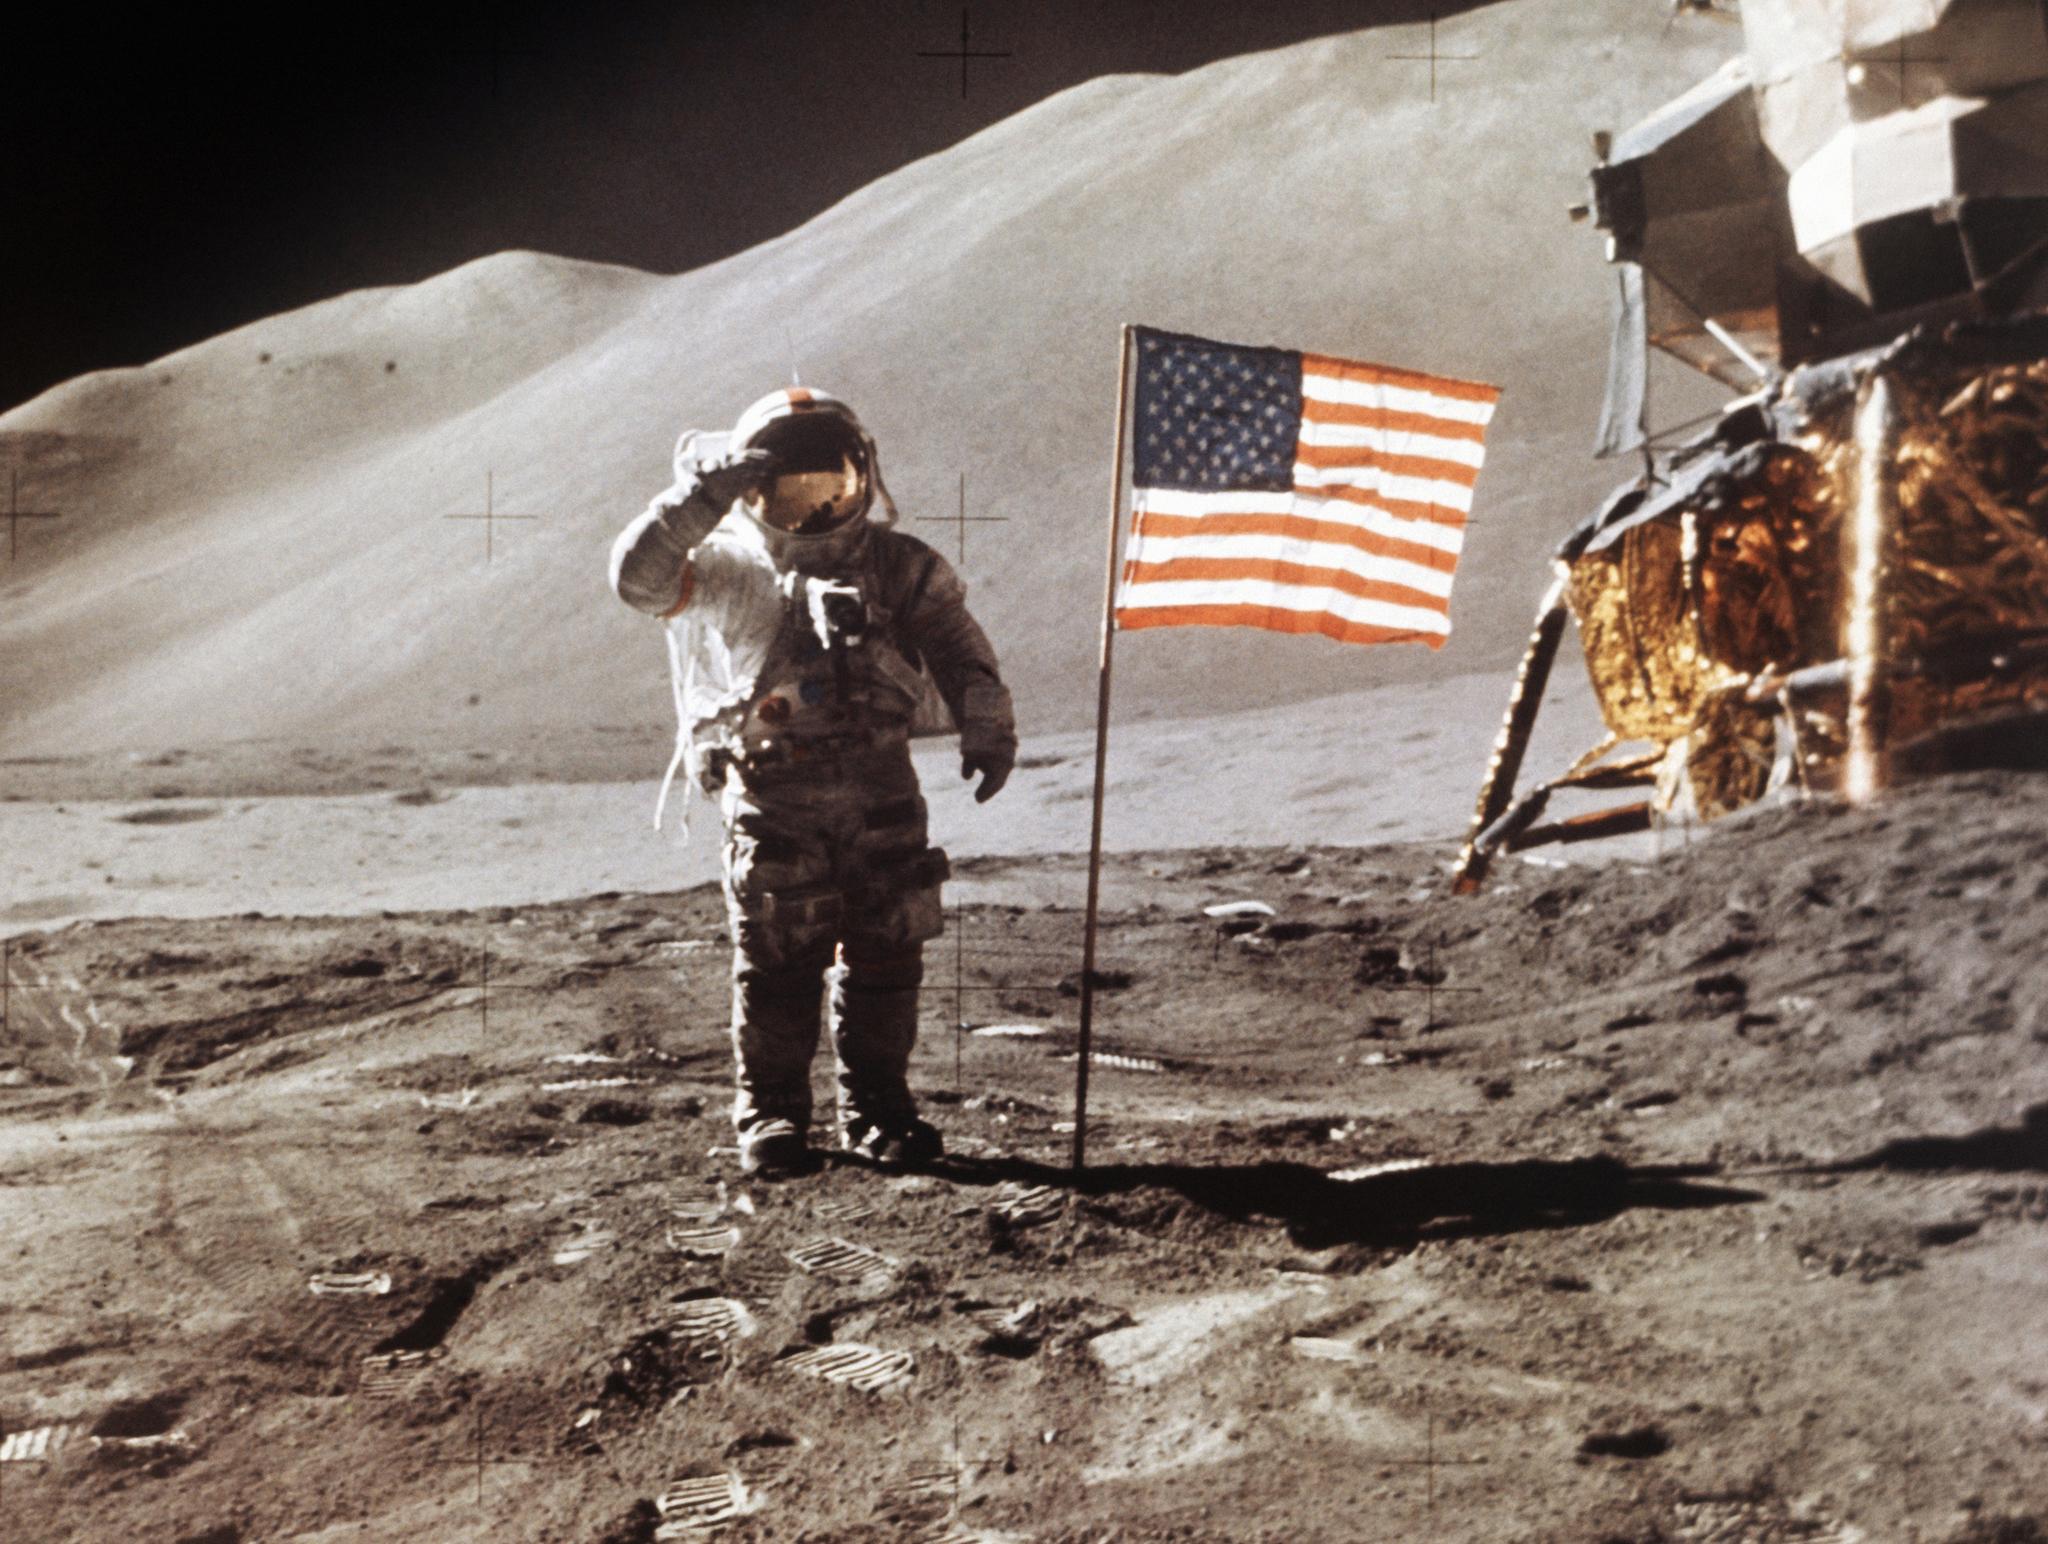 In this July 30, 1971 photo made available by NASA, Apollo 15 Lunar Module Pilot James B. Irwin salutes while standing beside the fourth American flag planted on the surface of the moon